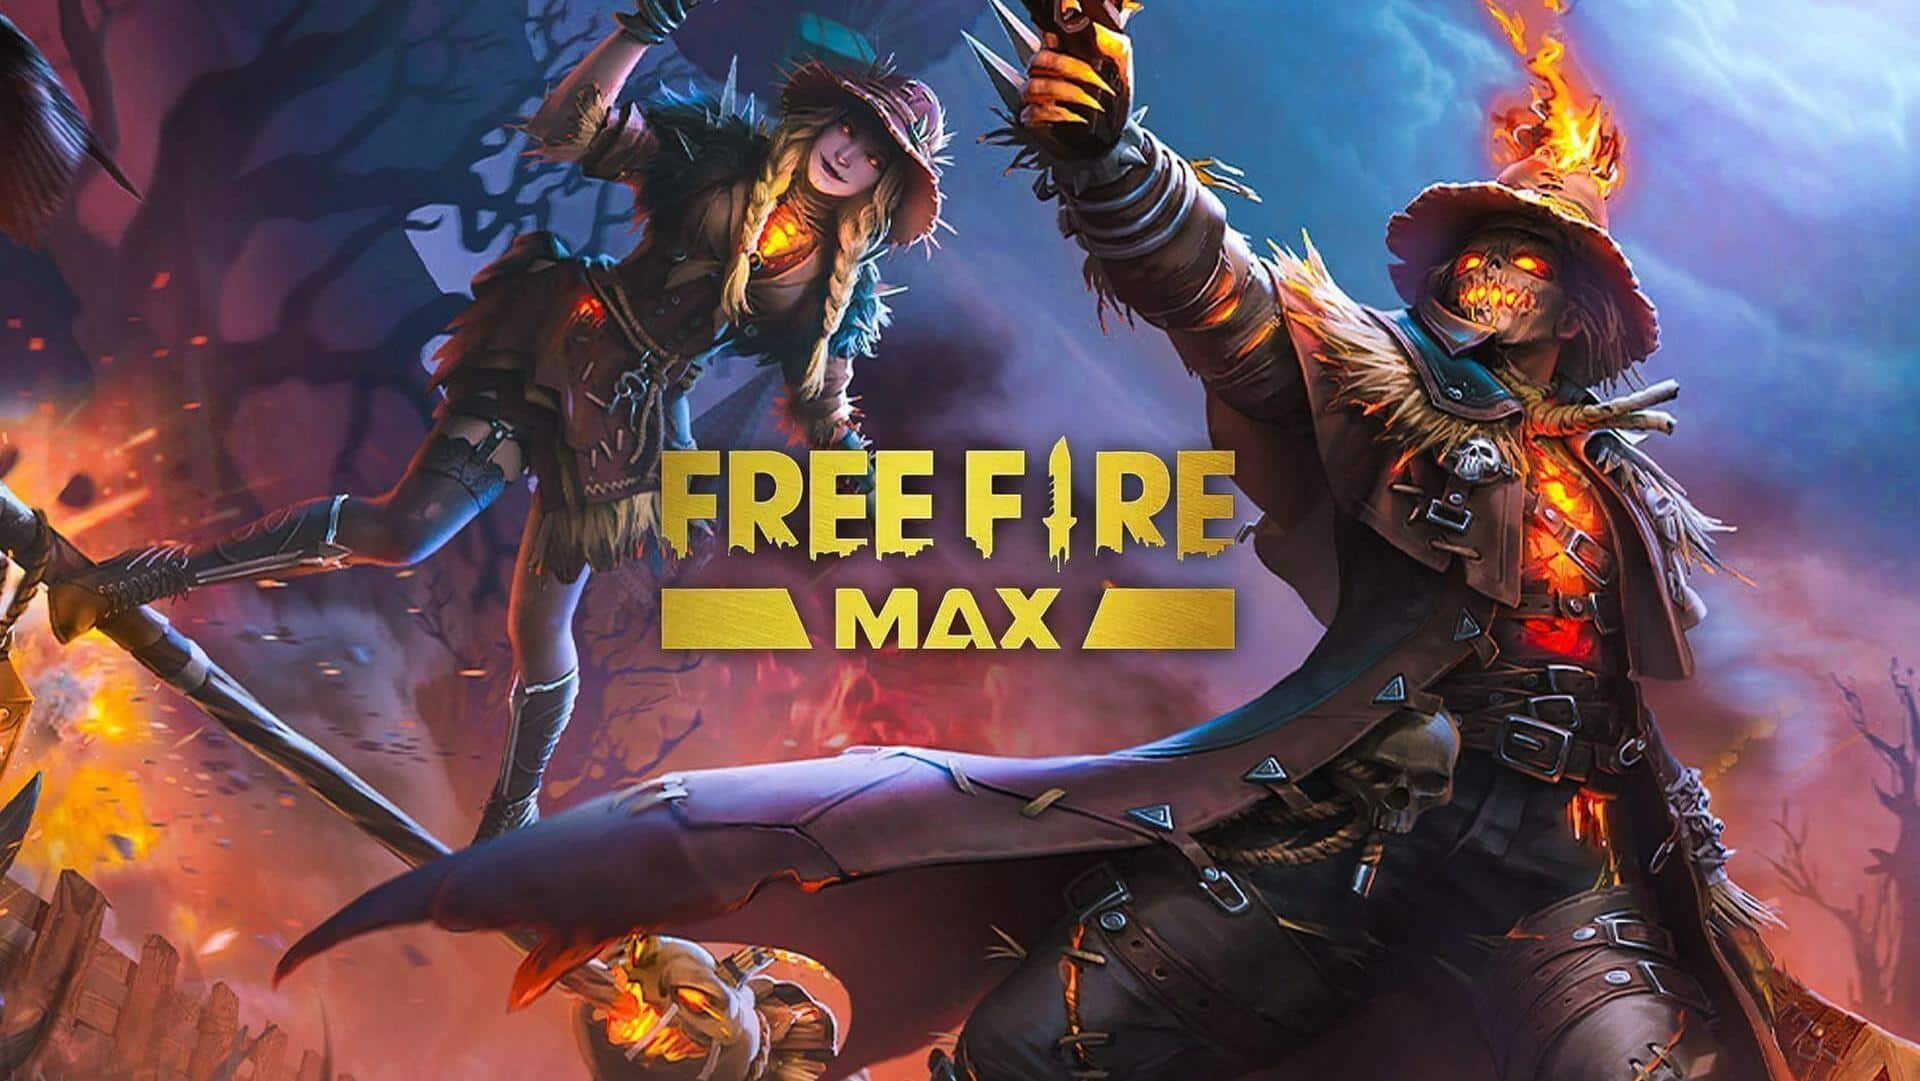 Free Fire MAX codes for April 20: Claim exclusive rewards